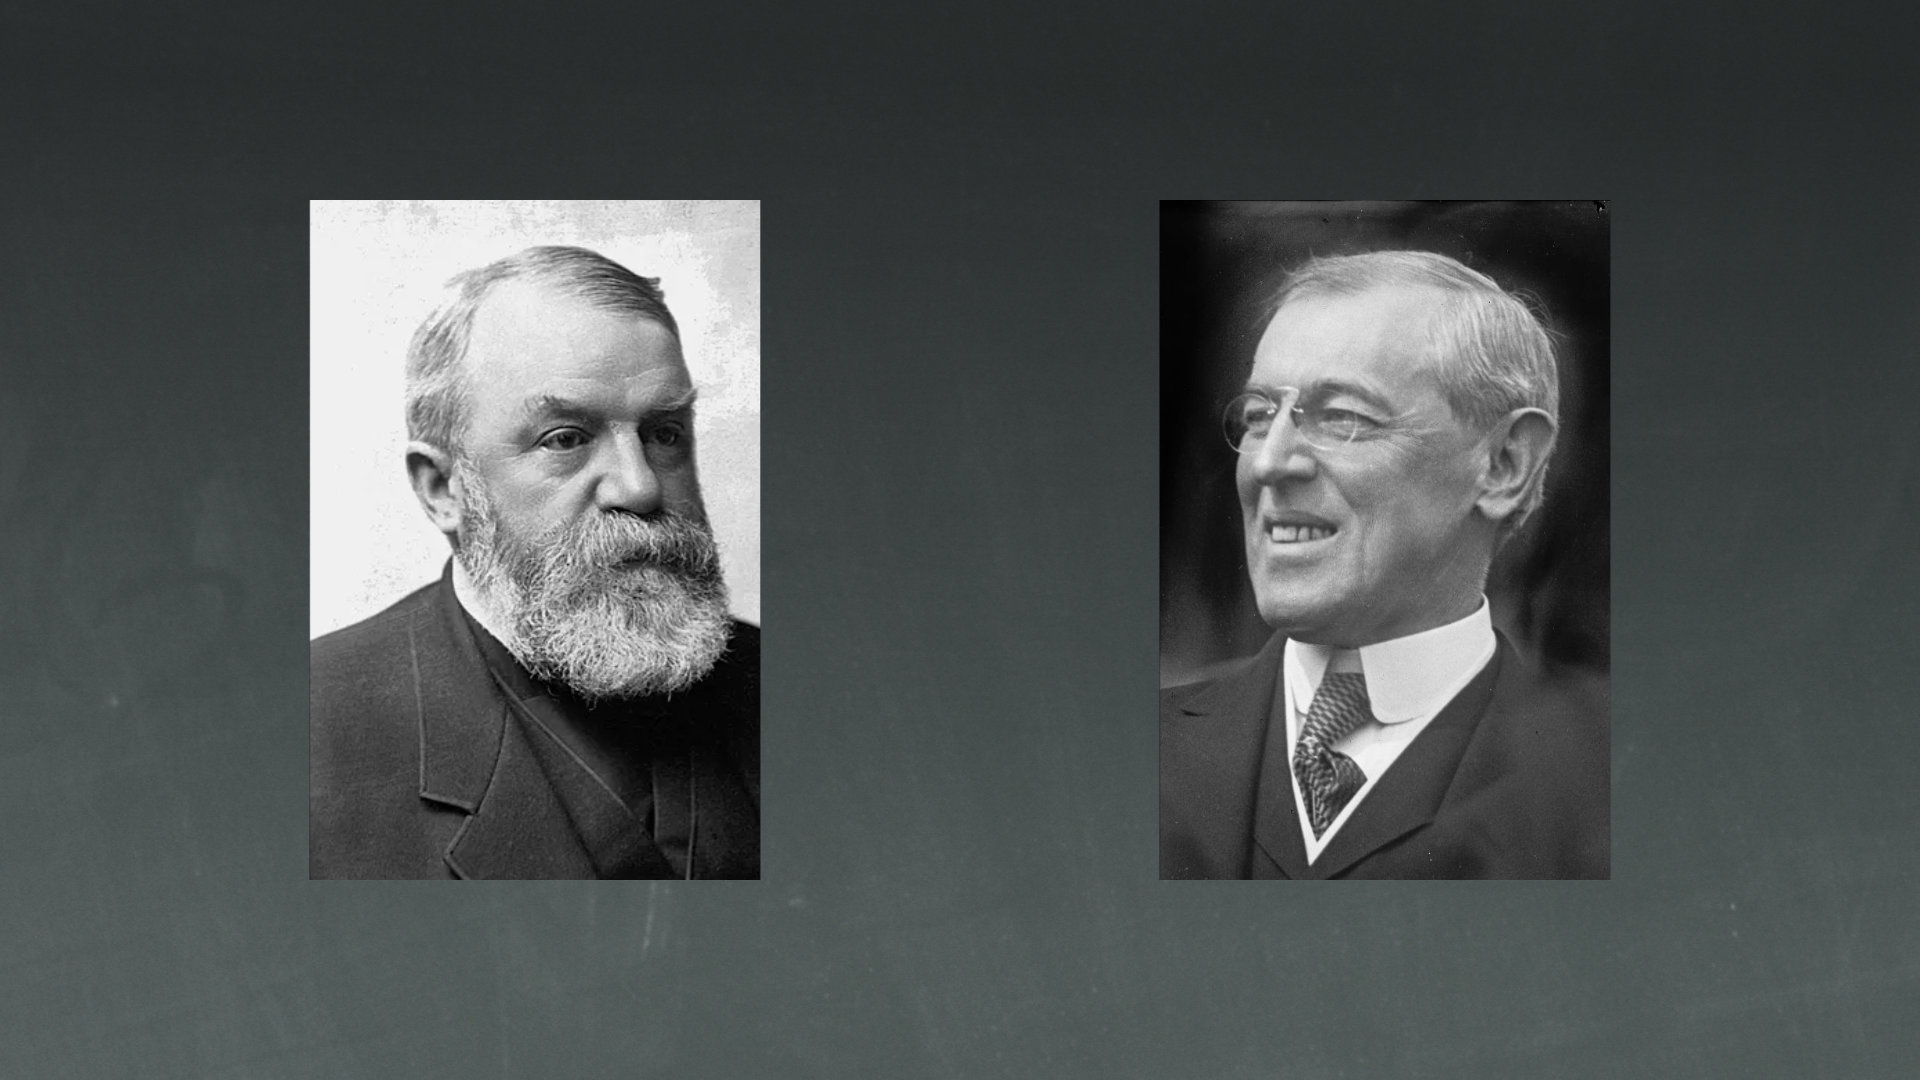 D.L. Moody and Woodrow Wilson